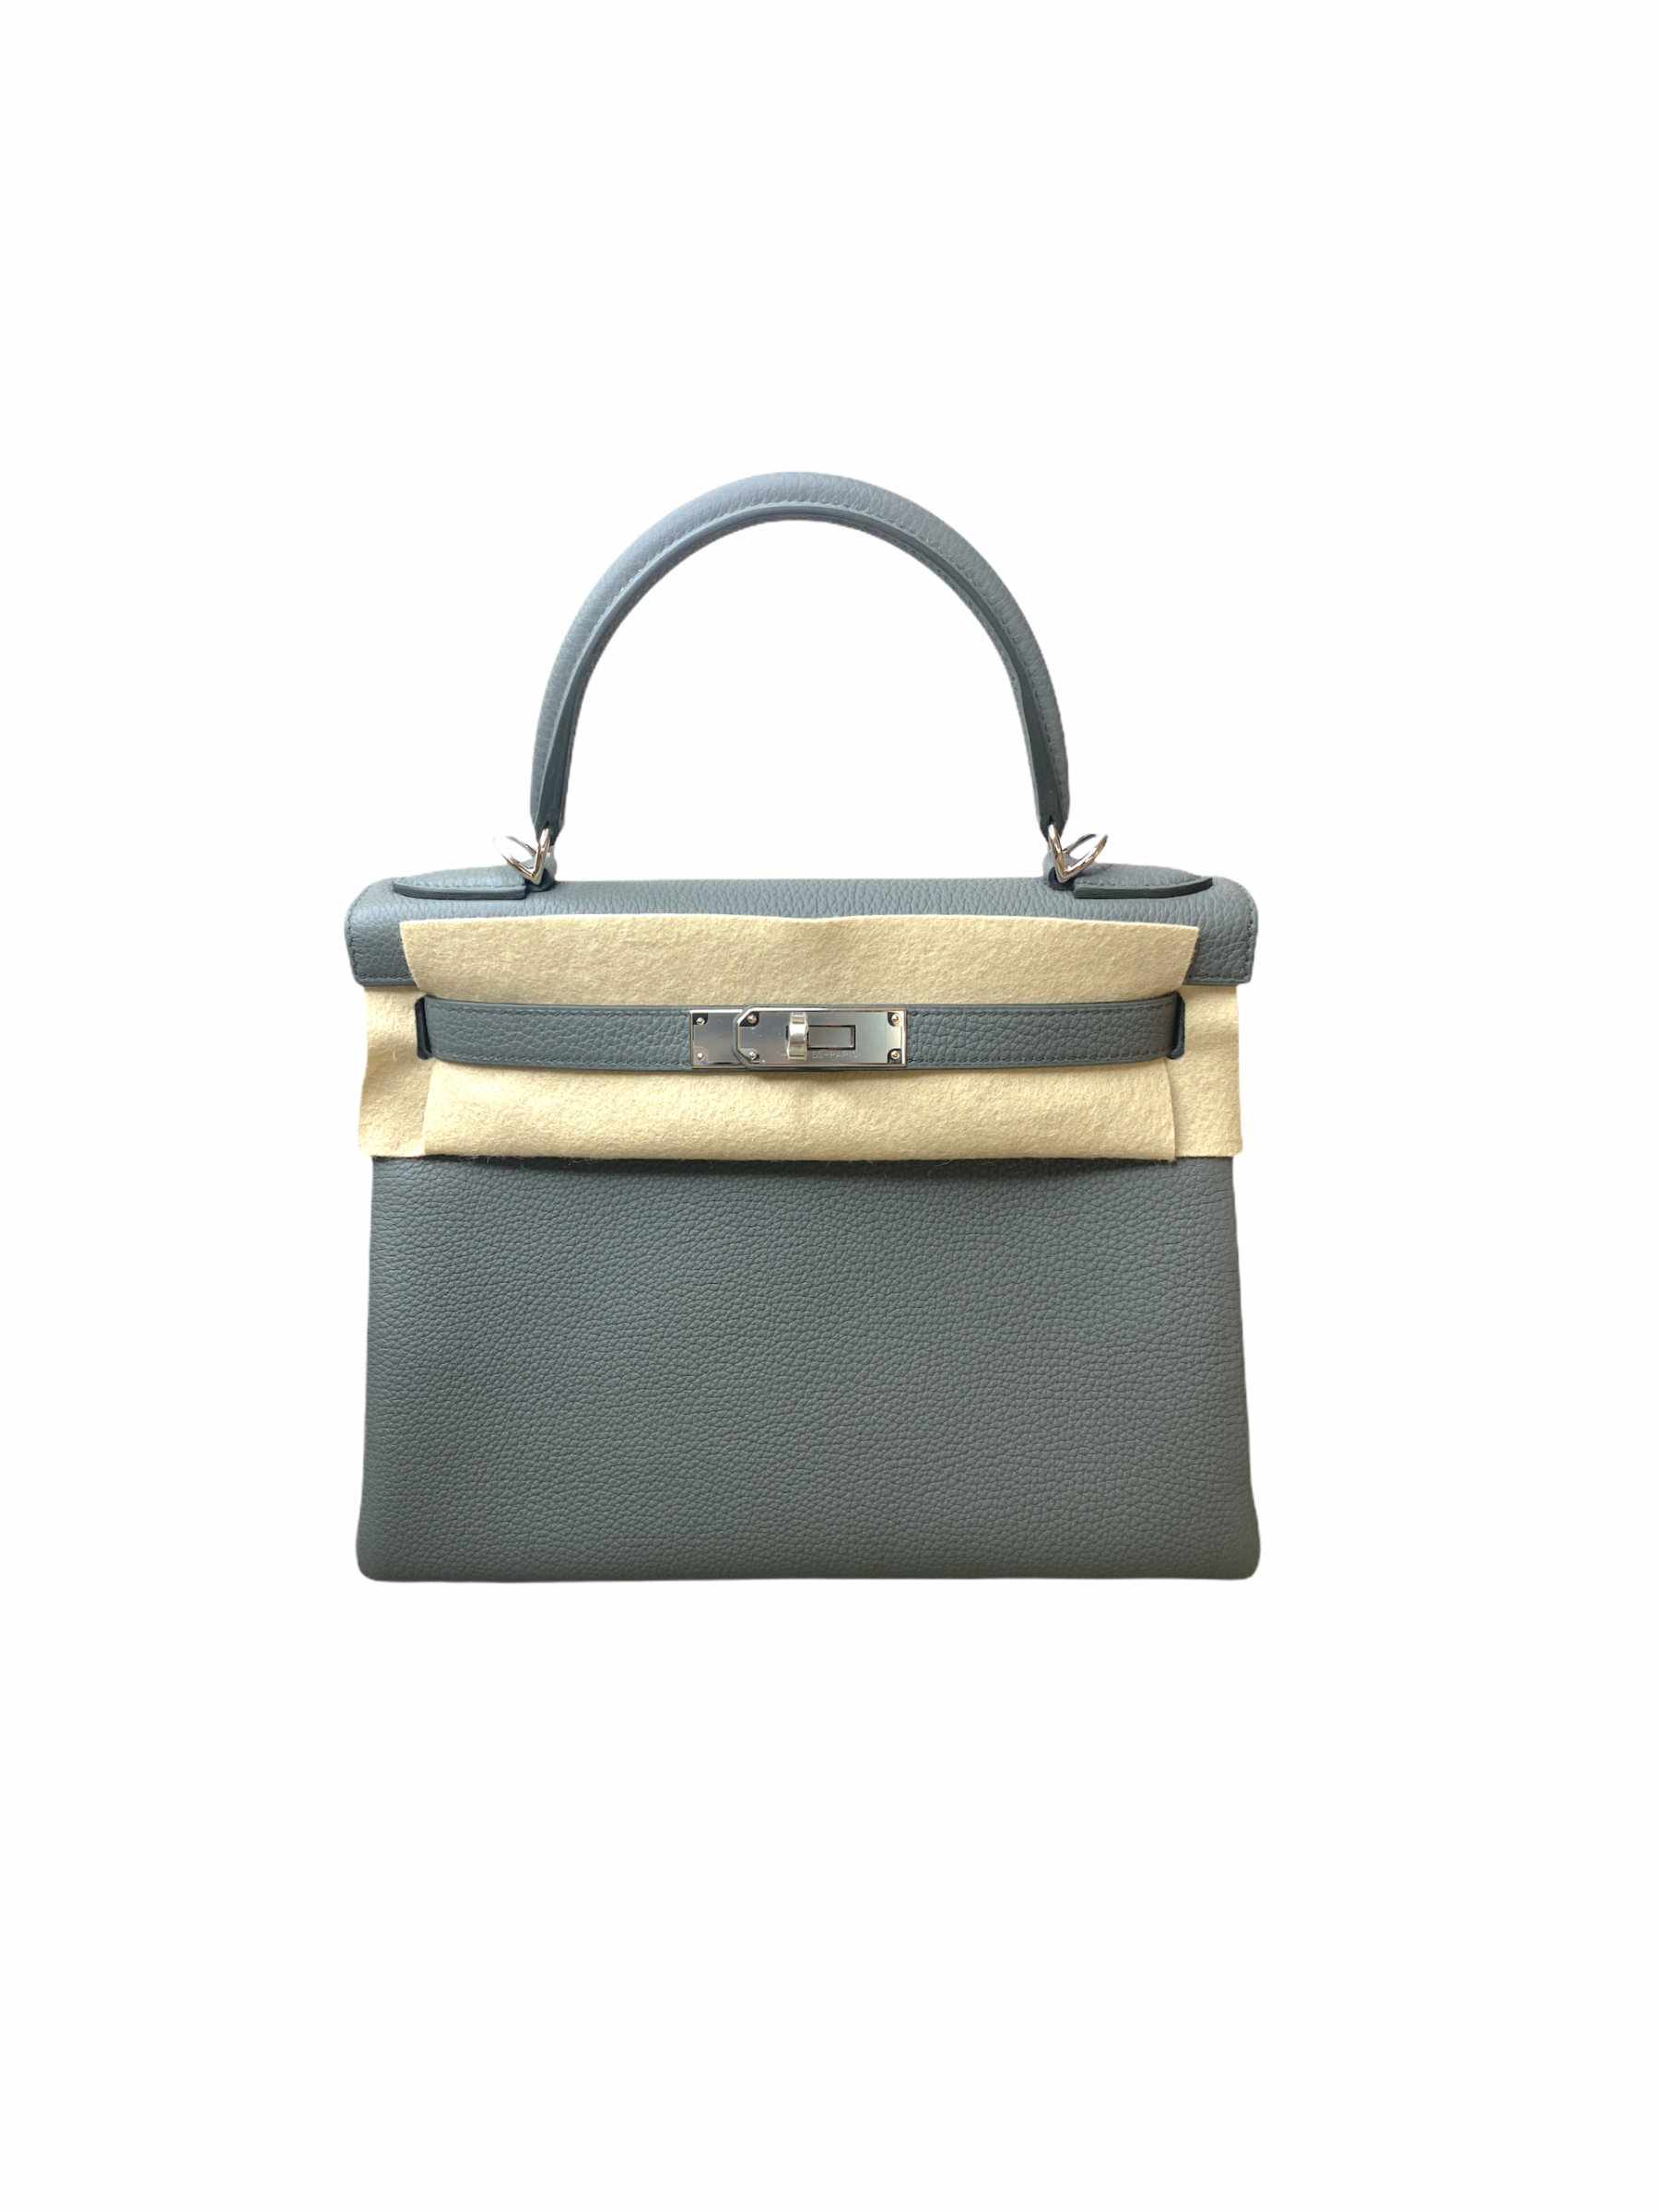 Hermes Kelly 28 Retourne Vert Rousseau Togo with Gold Hardware, As